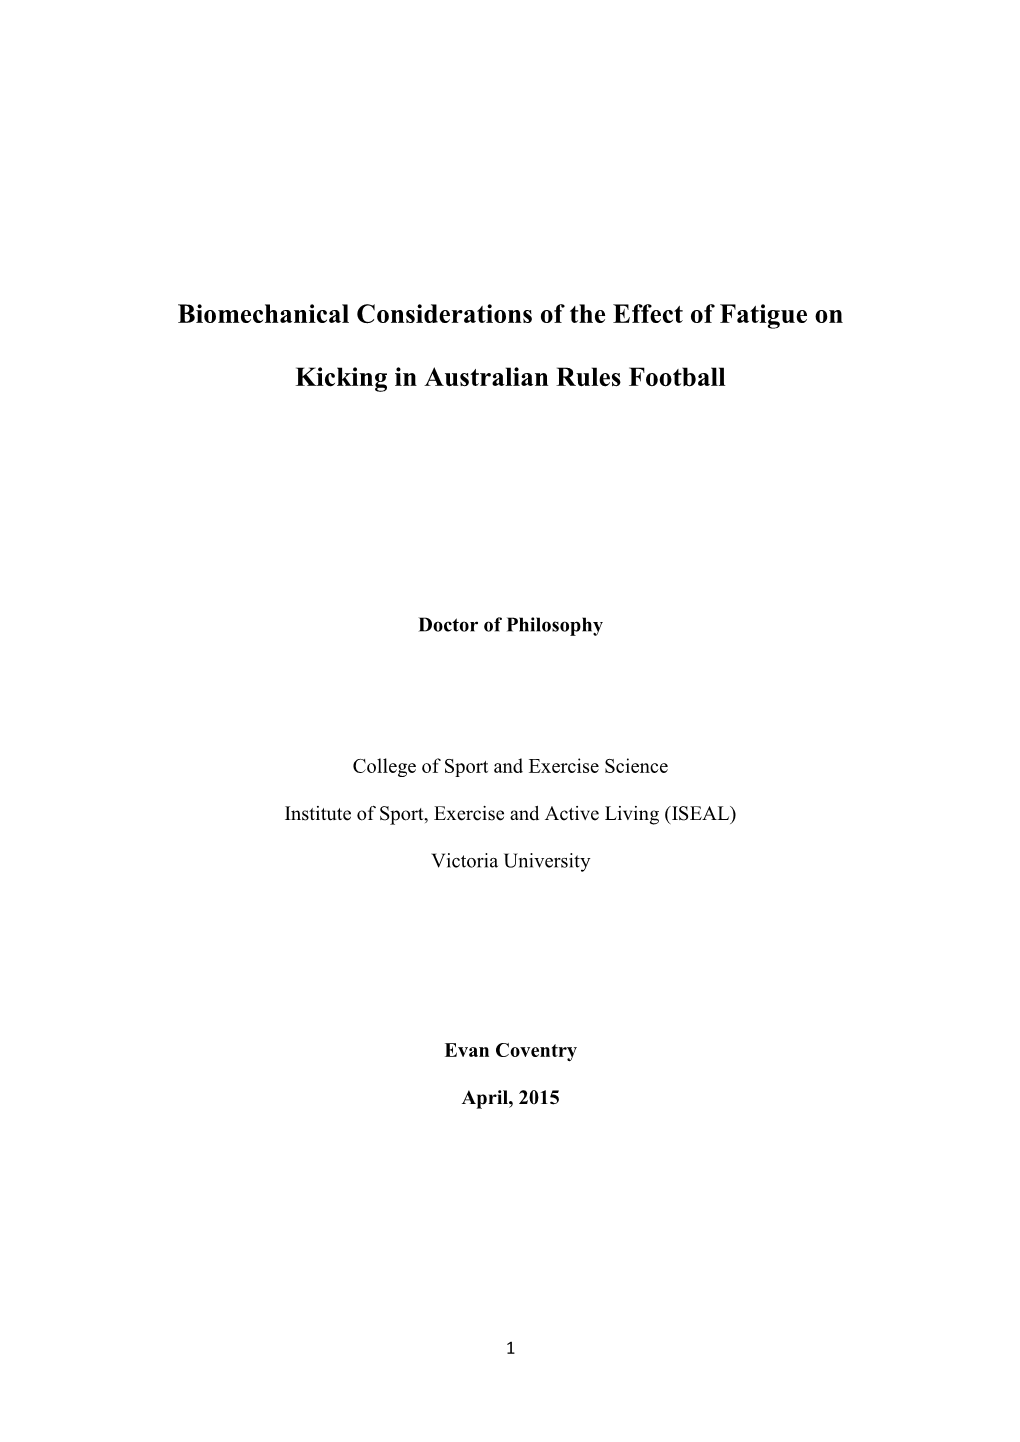 Biomechanical Considerations of the Effect of Fatigue on Kicking In